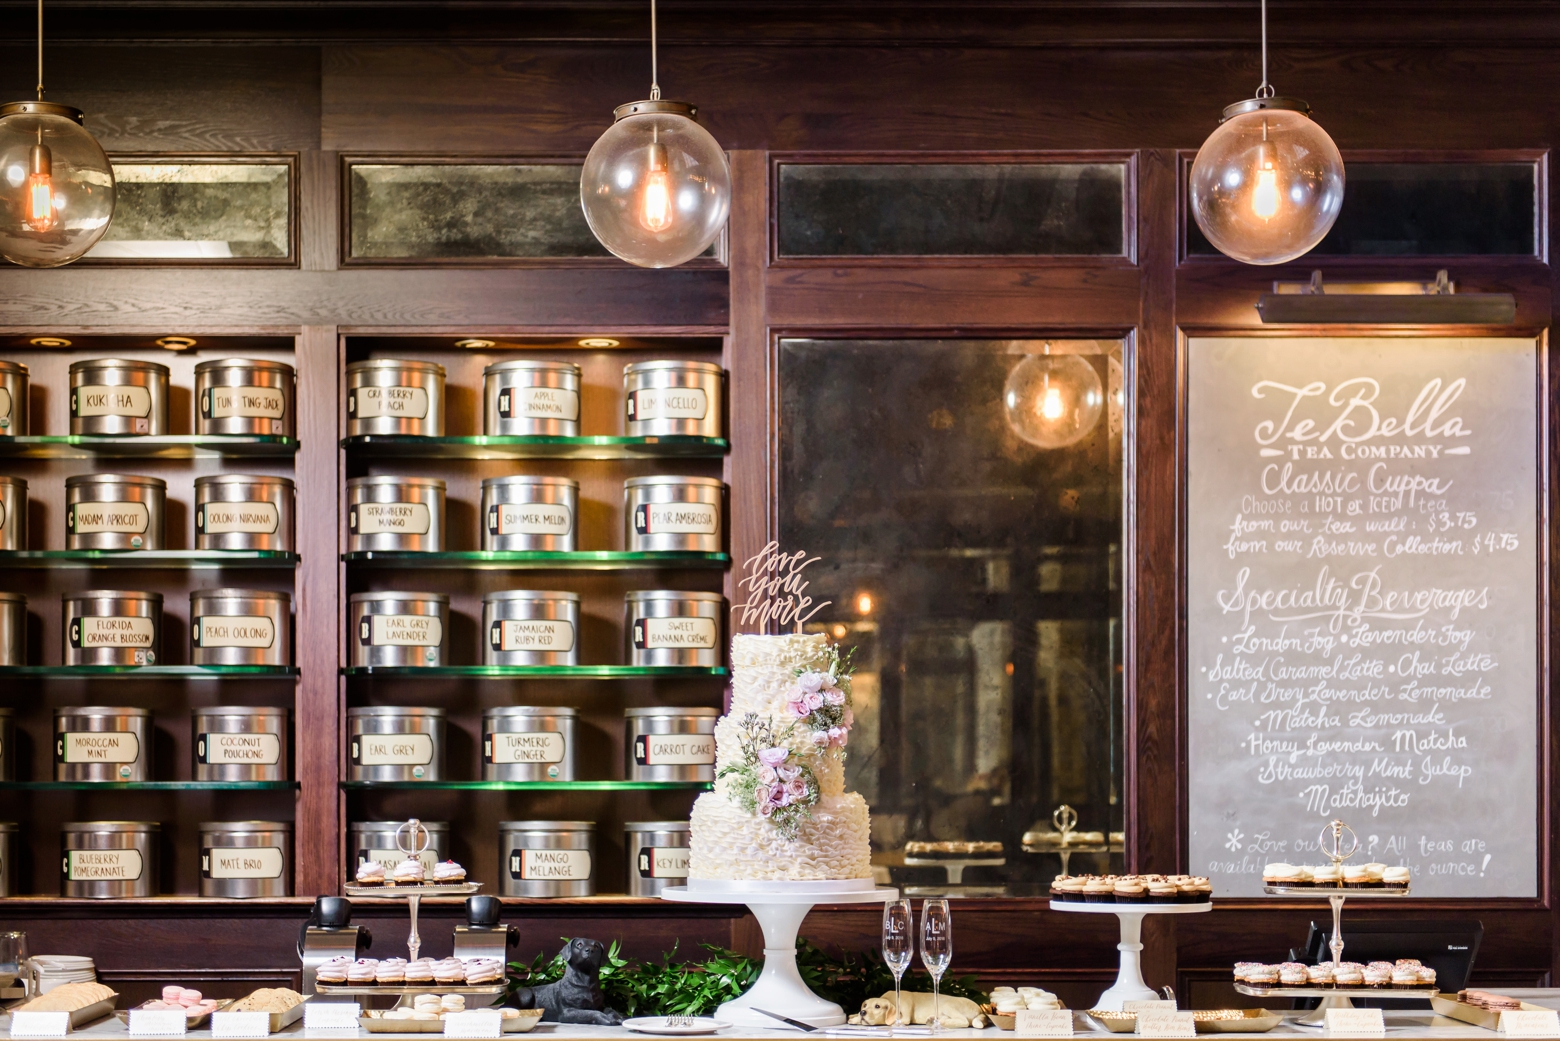 The wedding table spread across the TeBell Tea Company's counter inside the Oxford Exchange